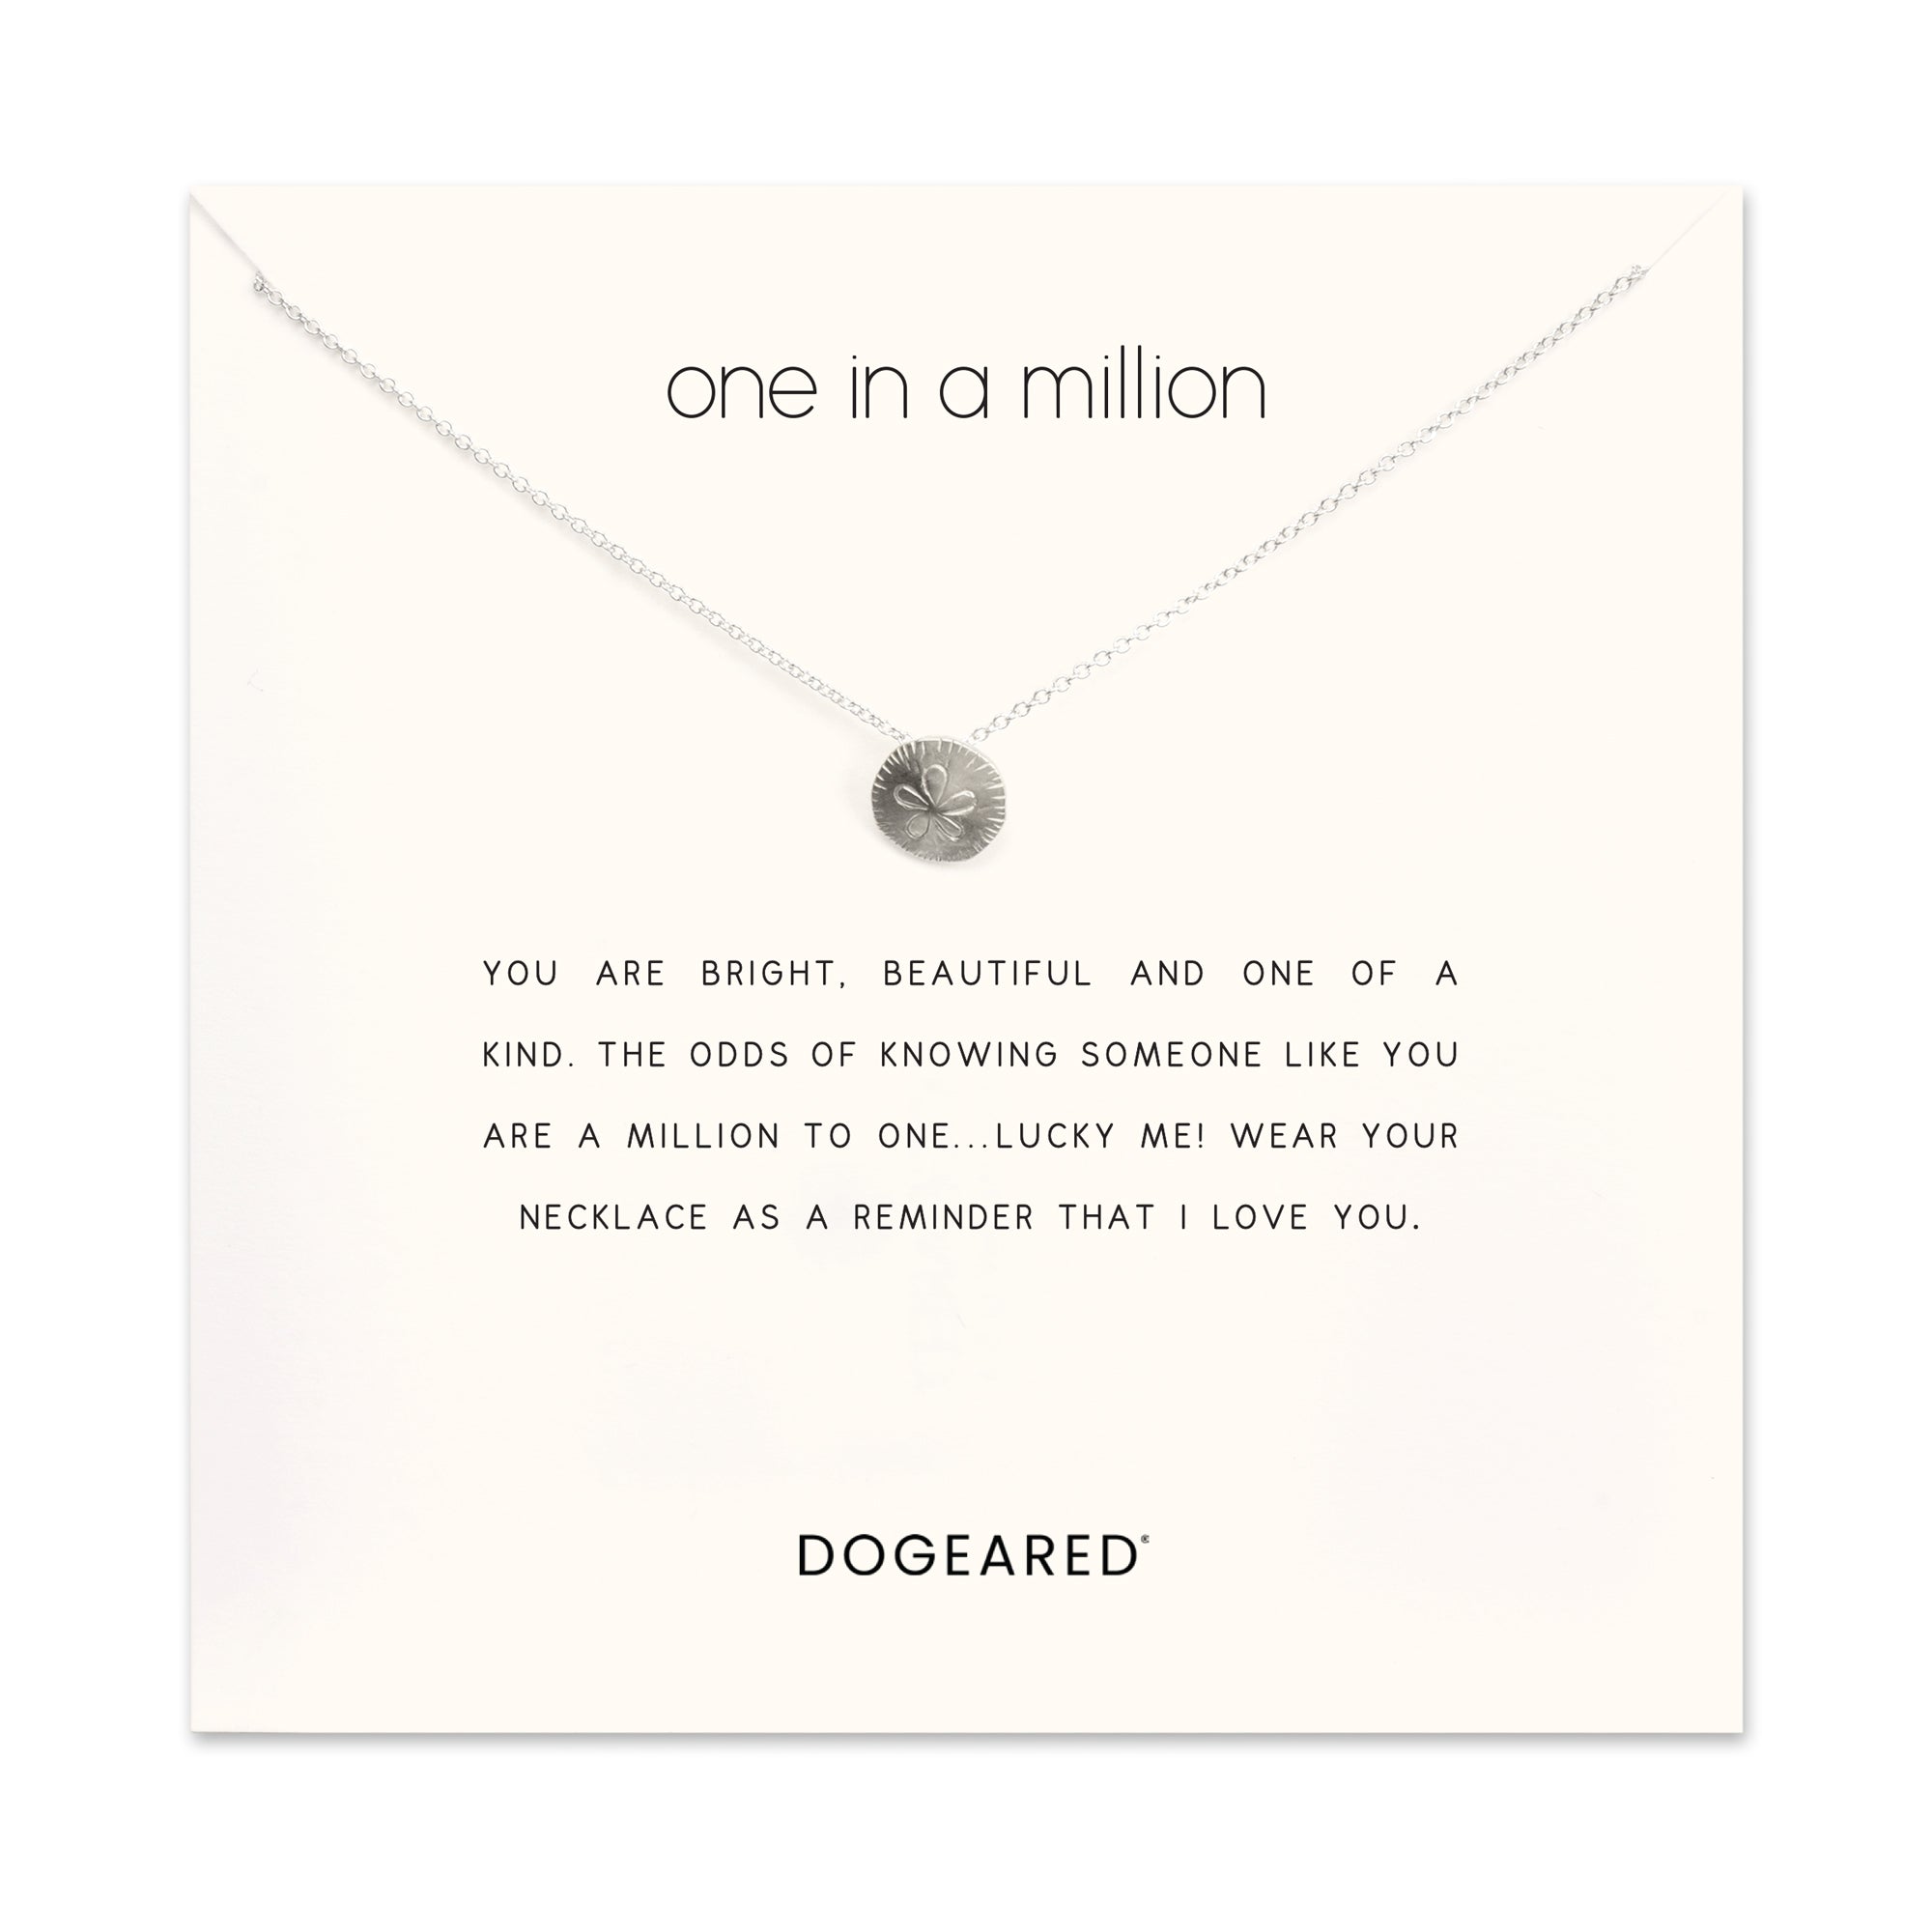 One In a million necklace - Dogeared